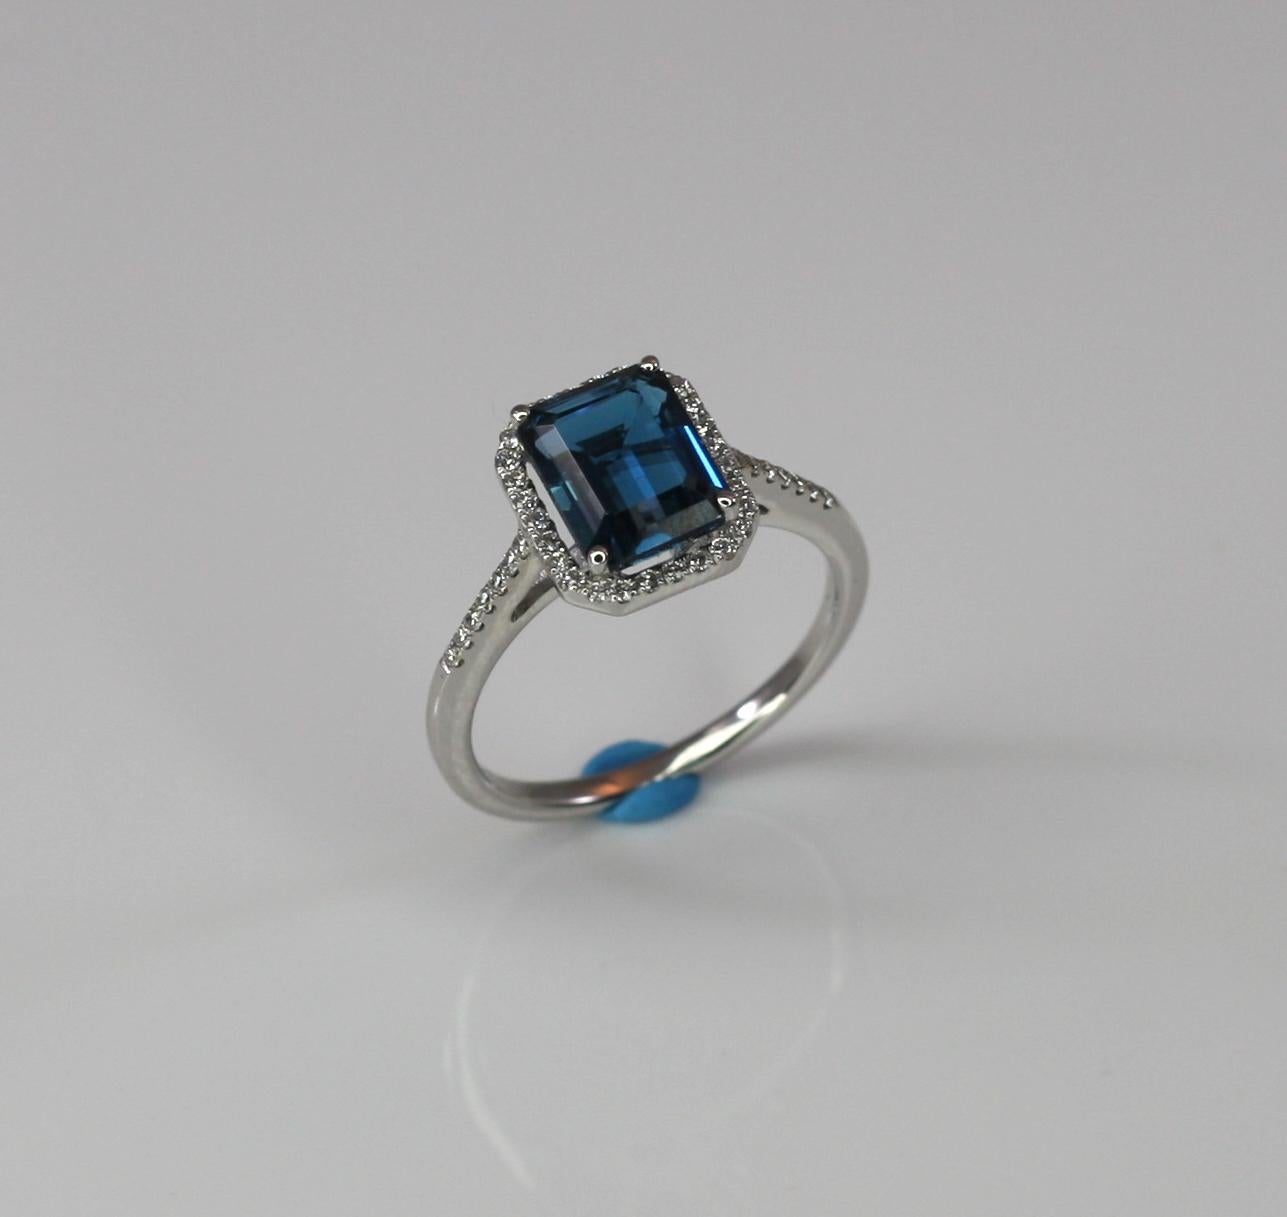 S. Georgios designer London Blue Topaz solitaire white gold 18 karat ring is all handmade and features a 3.44 Carat London Blue Topaz emerald cut, accompanied by Brilliant-cut White Diamonds, the total weight of 0.22 Carat. This is a gorgeous